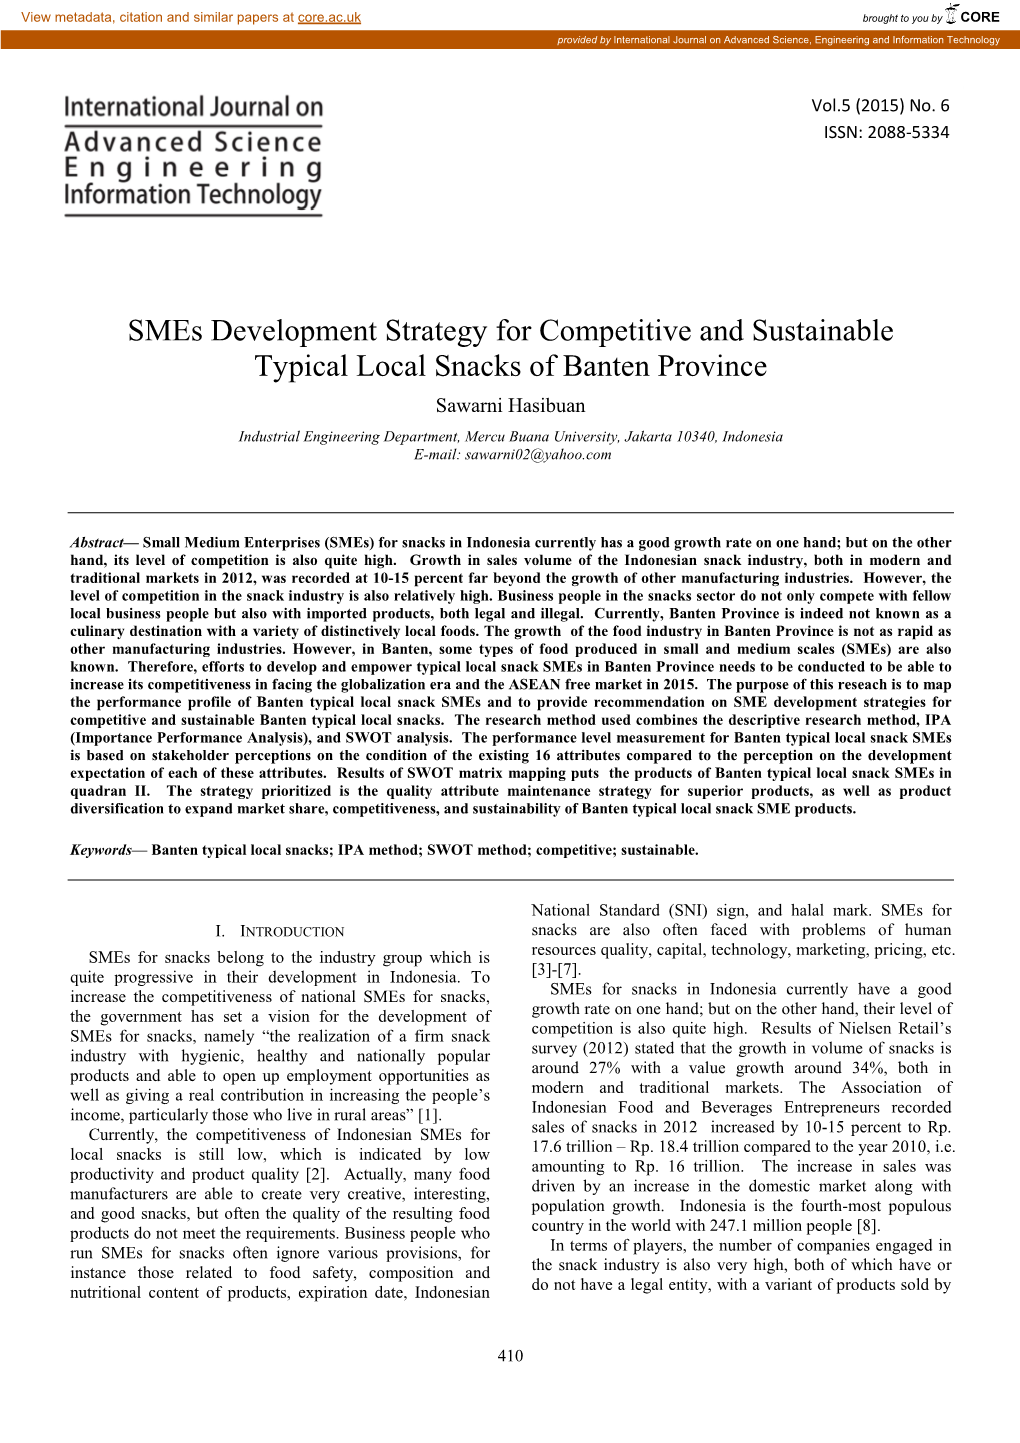 Smes Development Strategy for Competitive and Sustainable